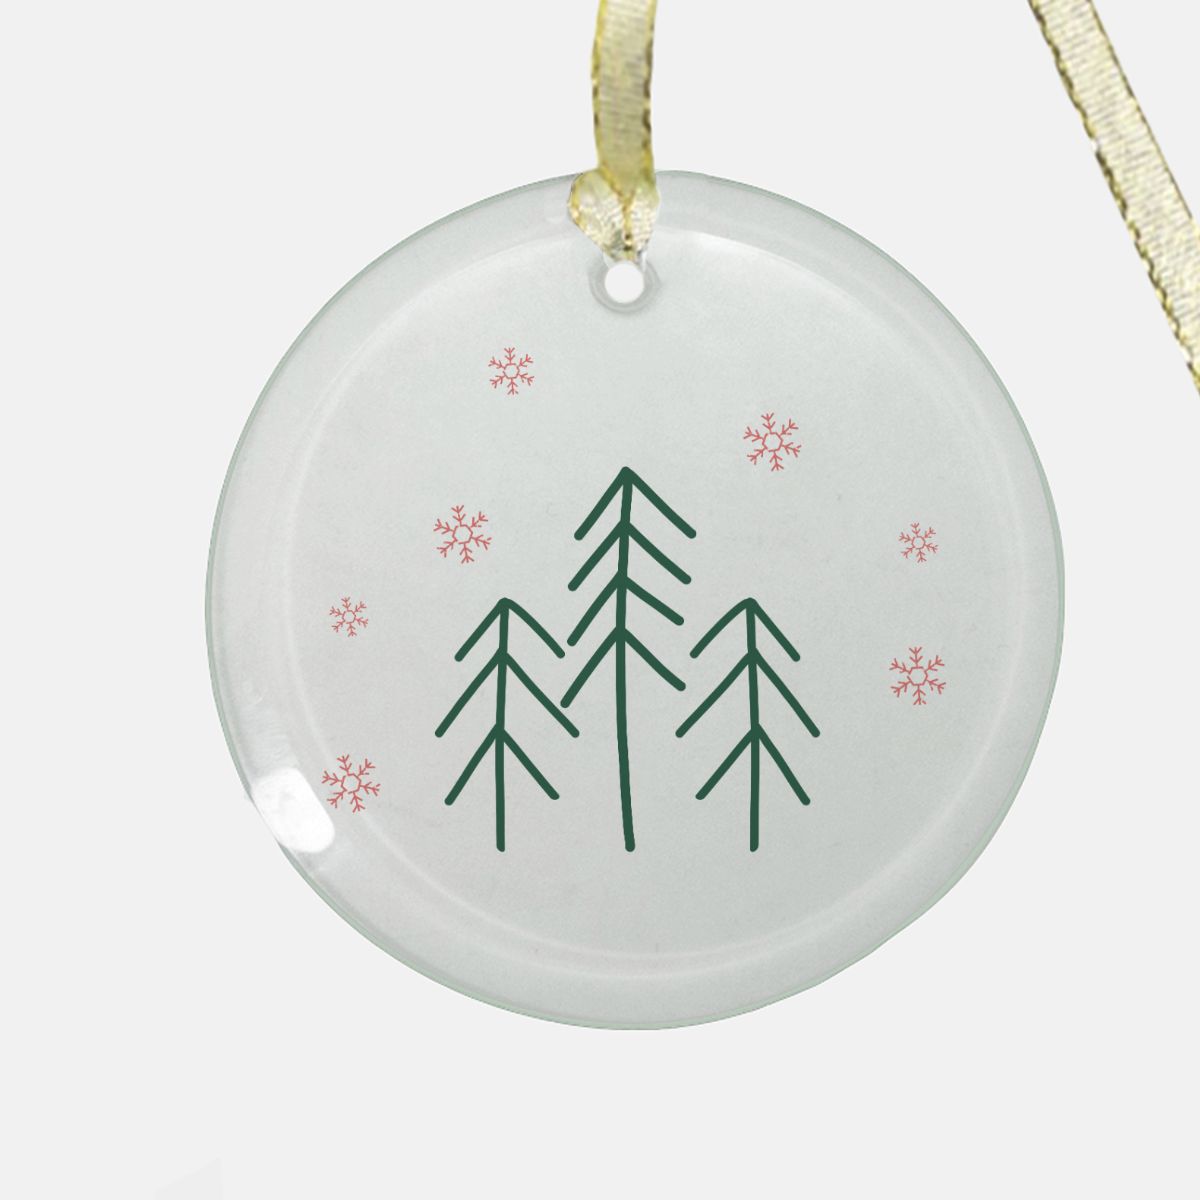 Round Clear Glass Holiday Ornament - Evergreen Trees & Red Snowflakes